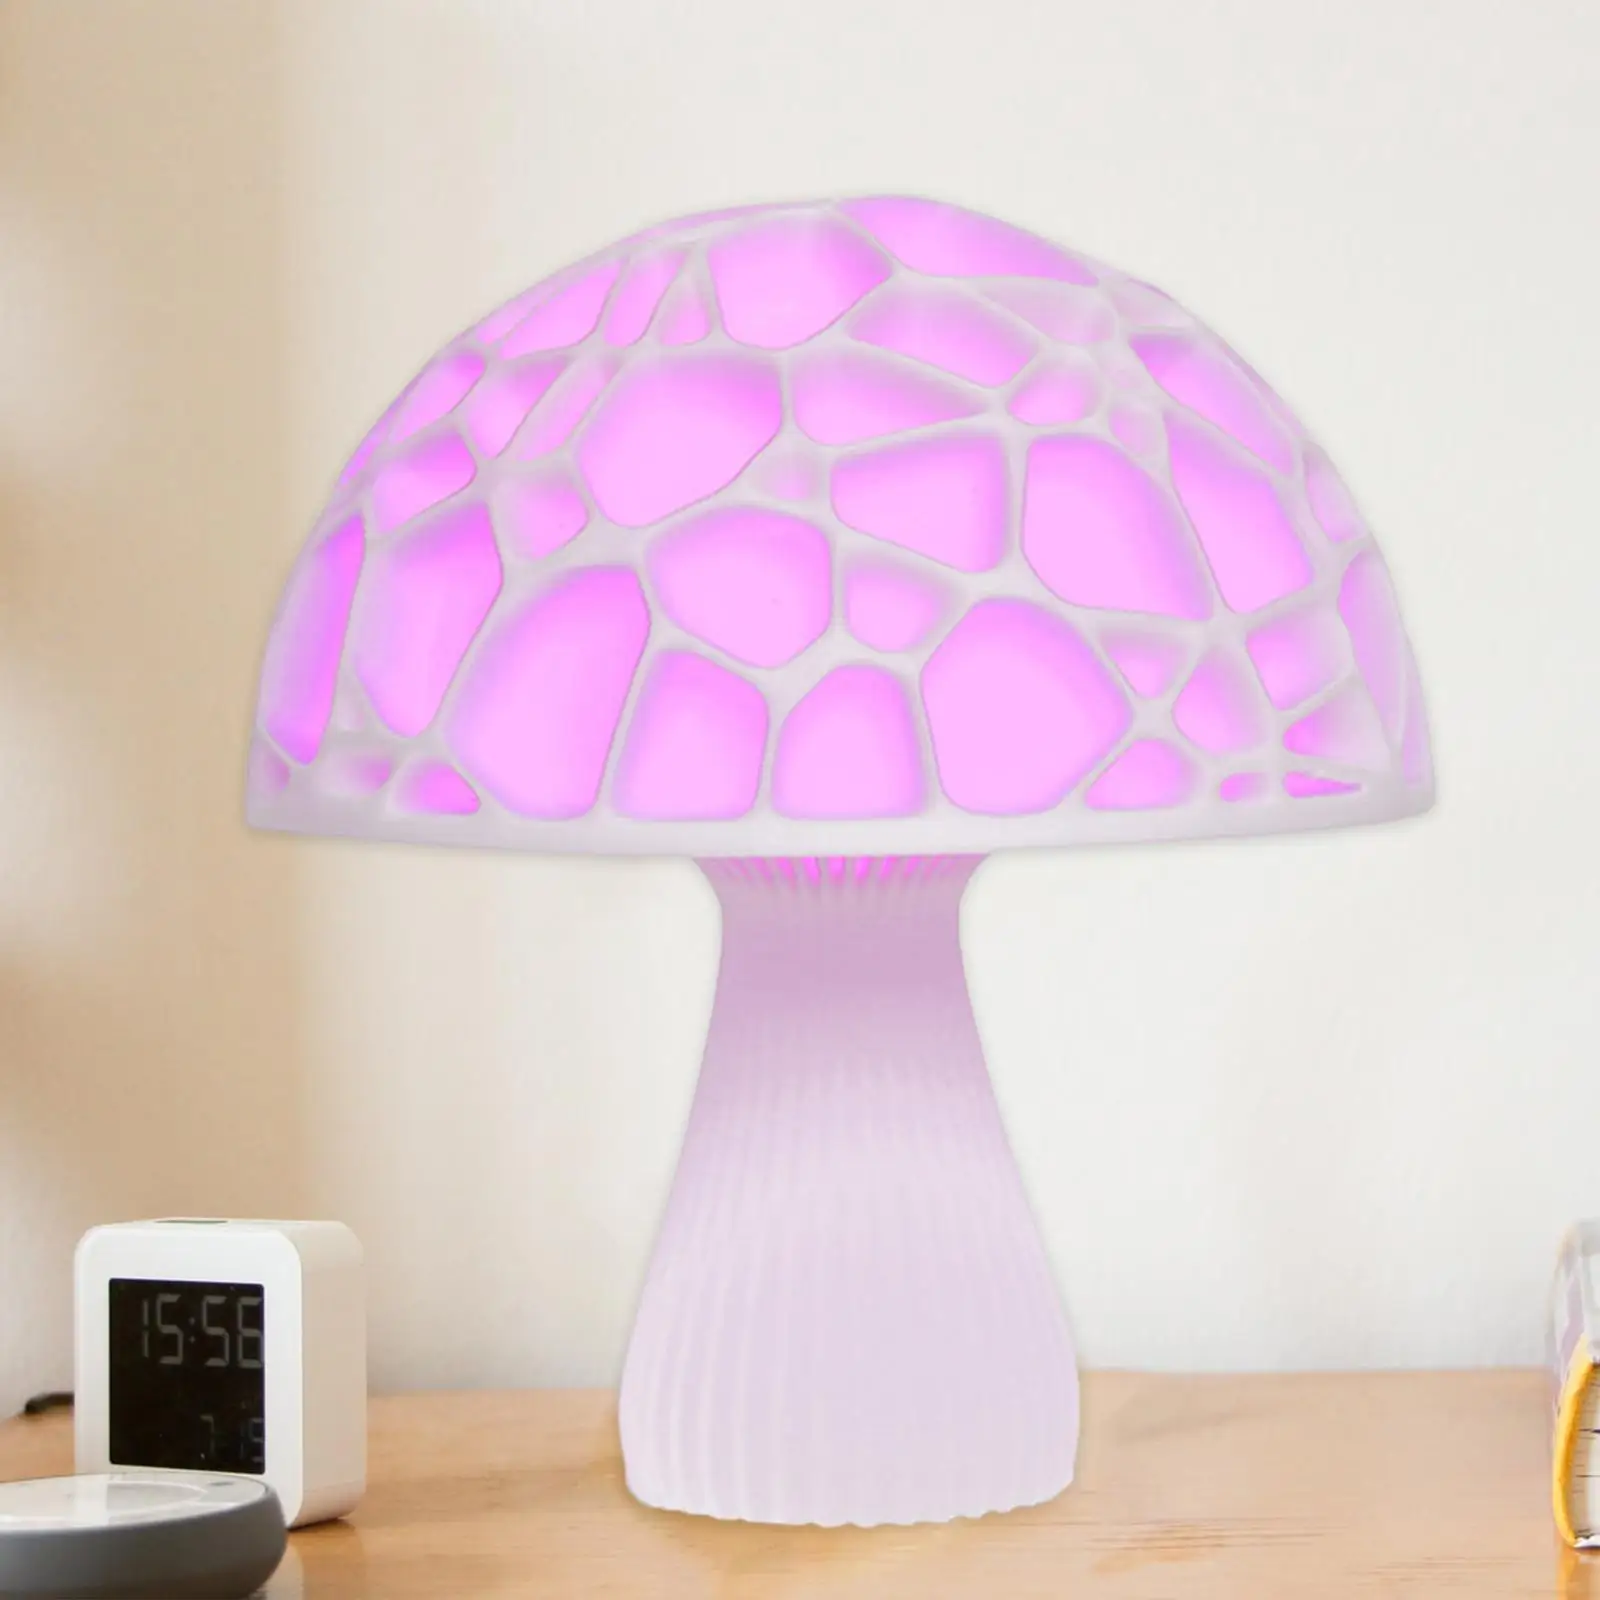 Table Lamp Remote Control   USB Night Light for Room Bedroom